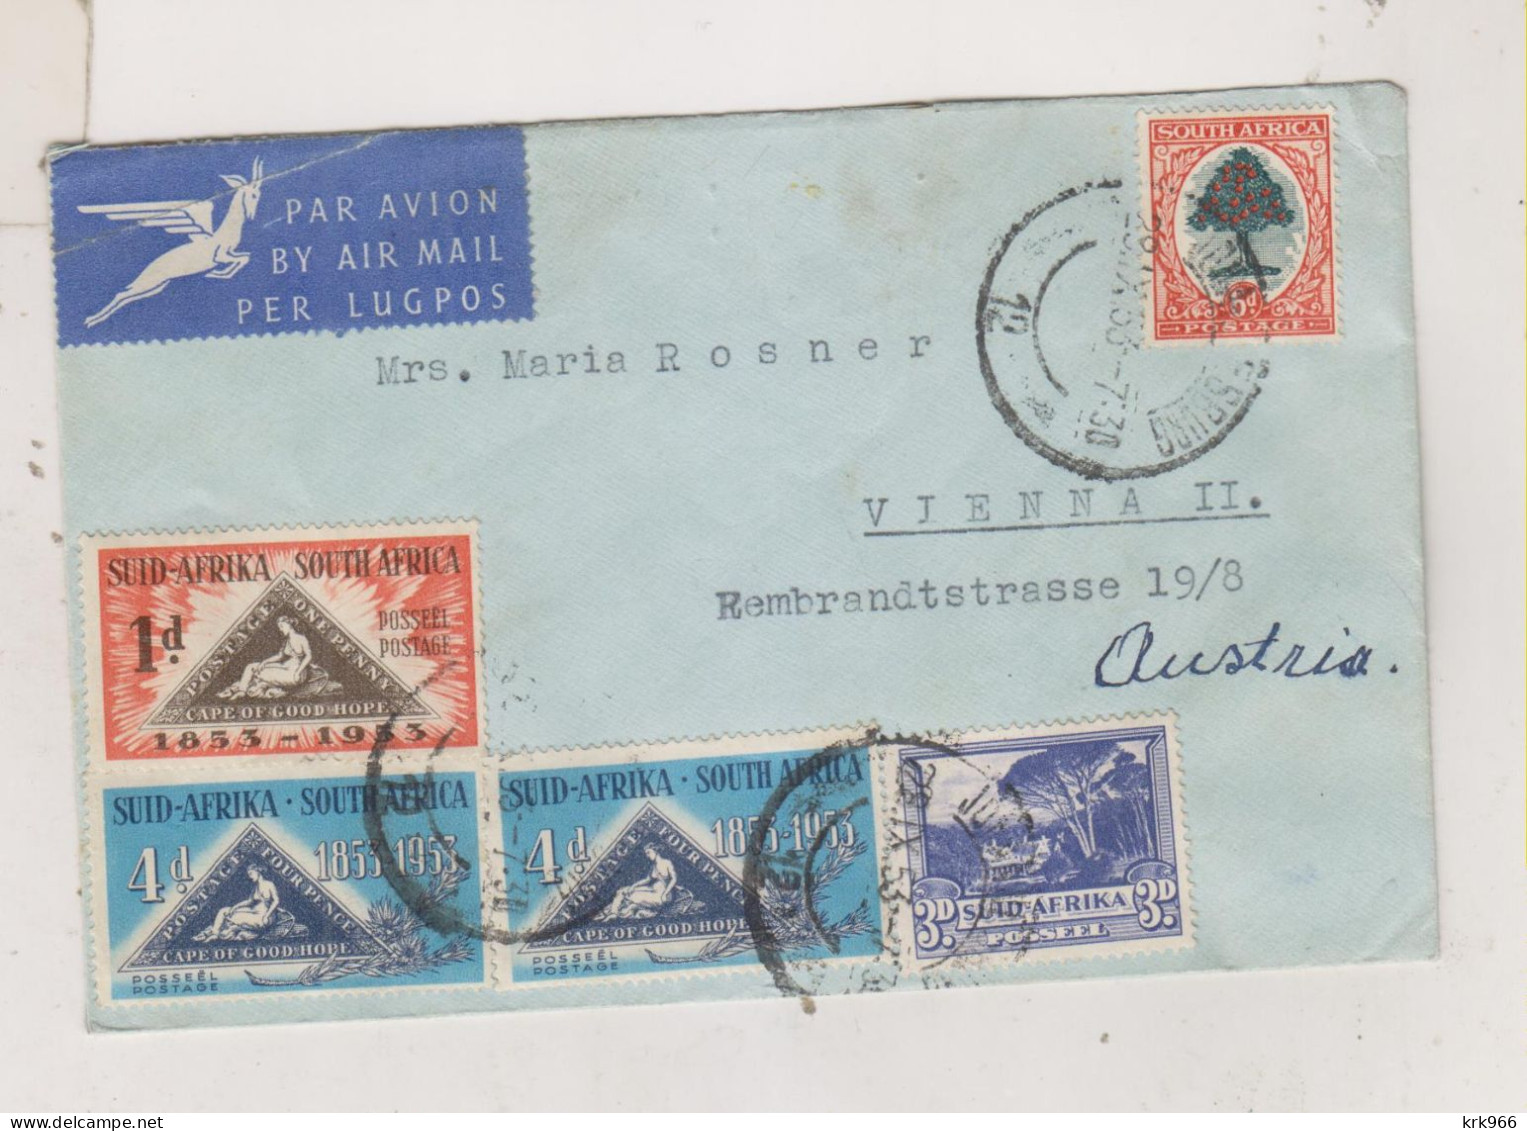 SOUTH AFRICA 1953 JOHANNESBURG  Nice   Airmail Cover To Austria - Luchtpost